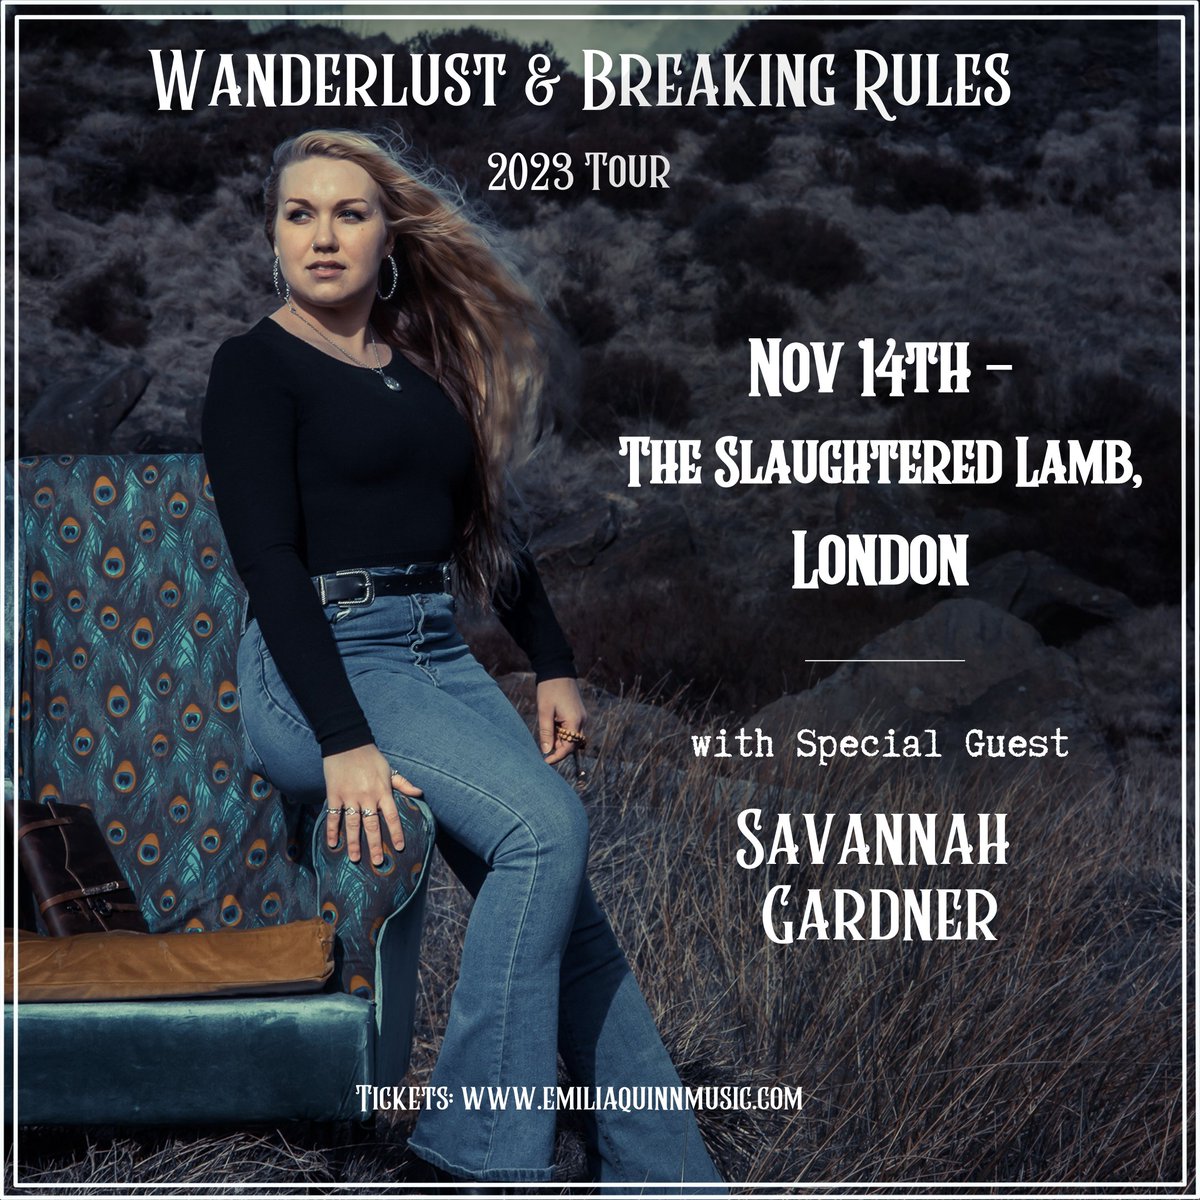 Excited to announce @savgardnermusic will be joining @EmiliaQMusic on her Wanderlust & Breaking Rules Tour this November. Tickets available here: rb.gy/lyolm